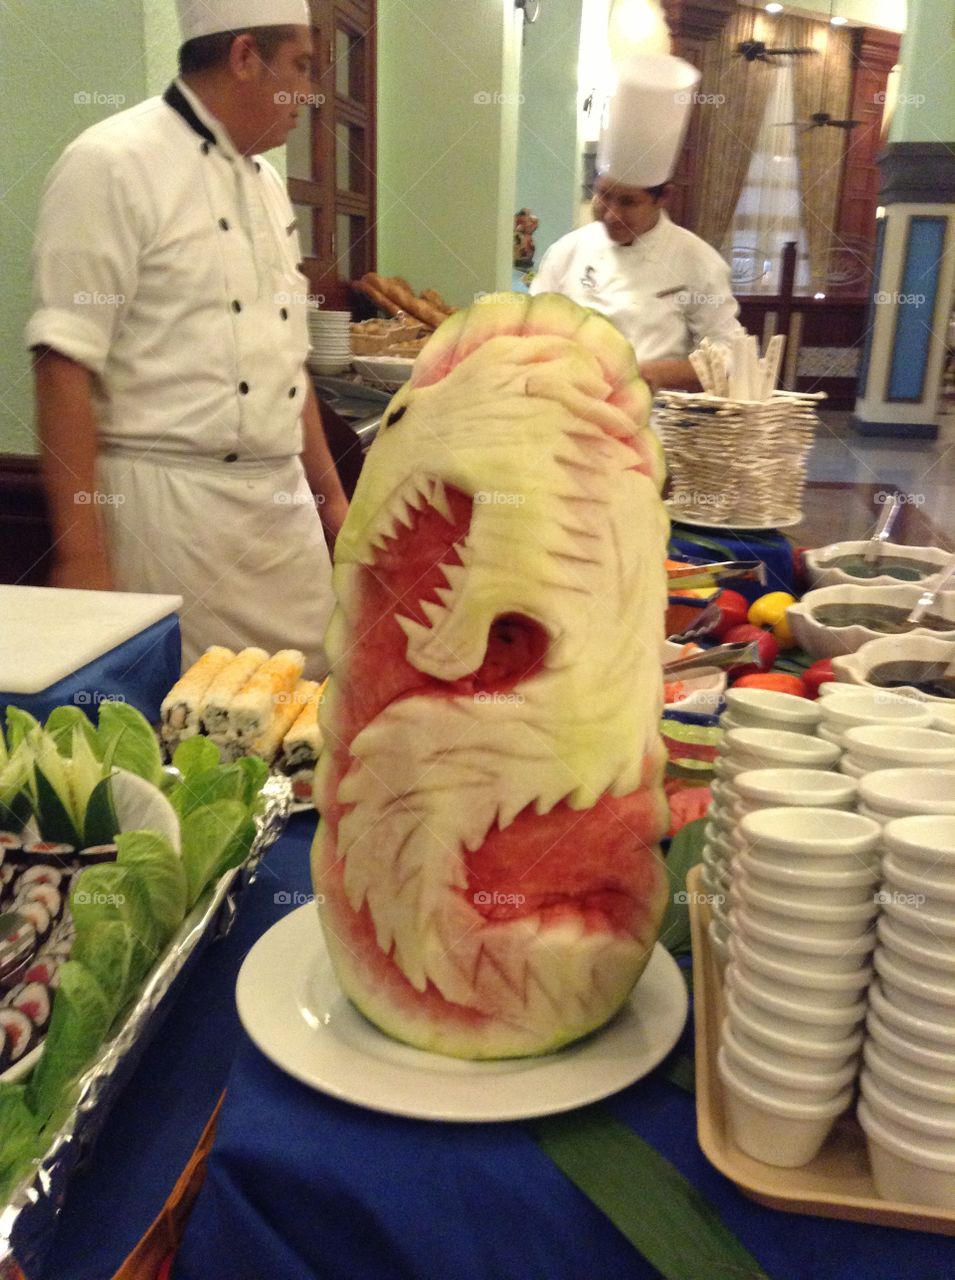 Dragon melon. This is a photo I took in Mexico of a watermelon I saw at dinner